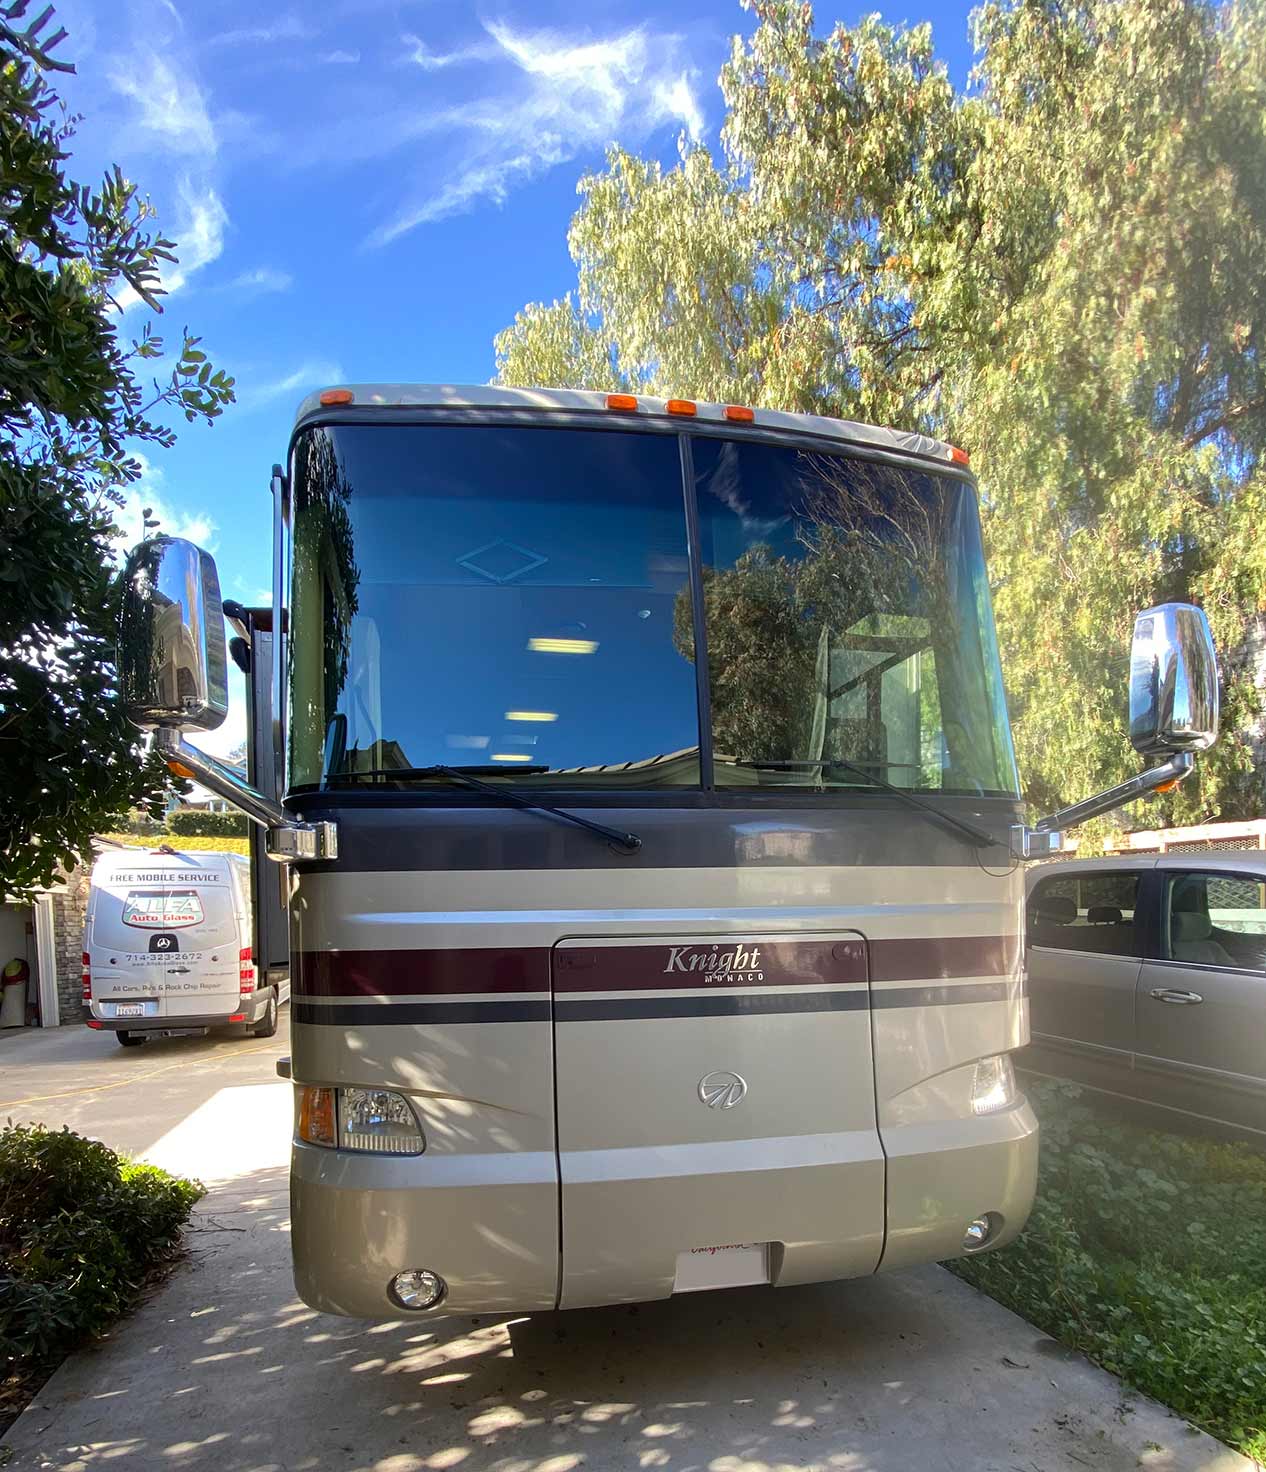 2005 Monaco Knight RV with new Windshields right and left